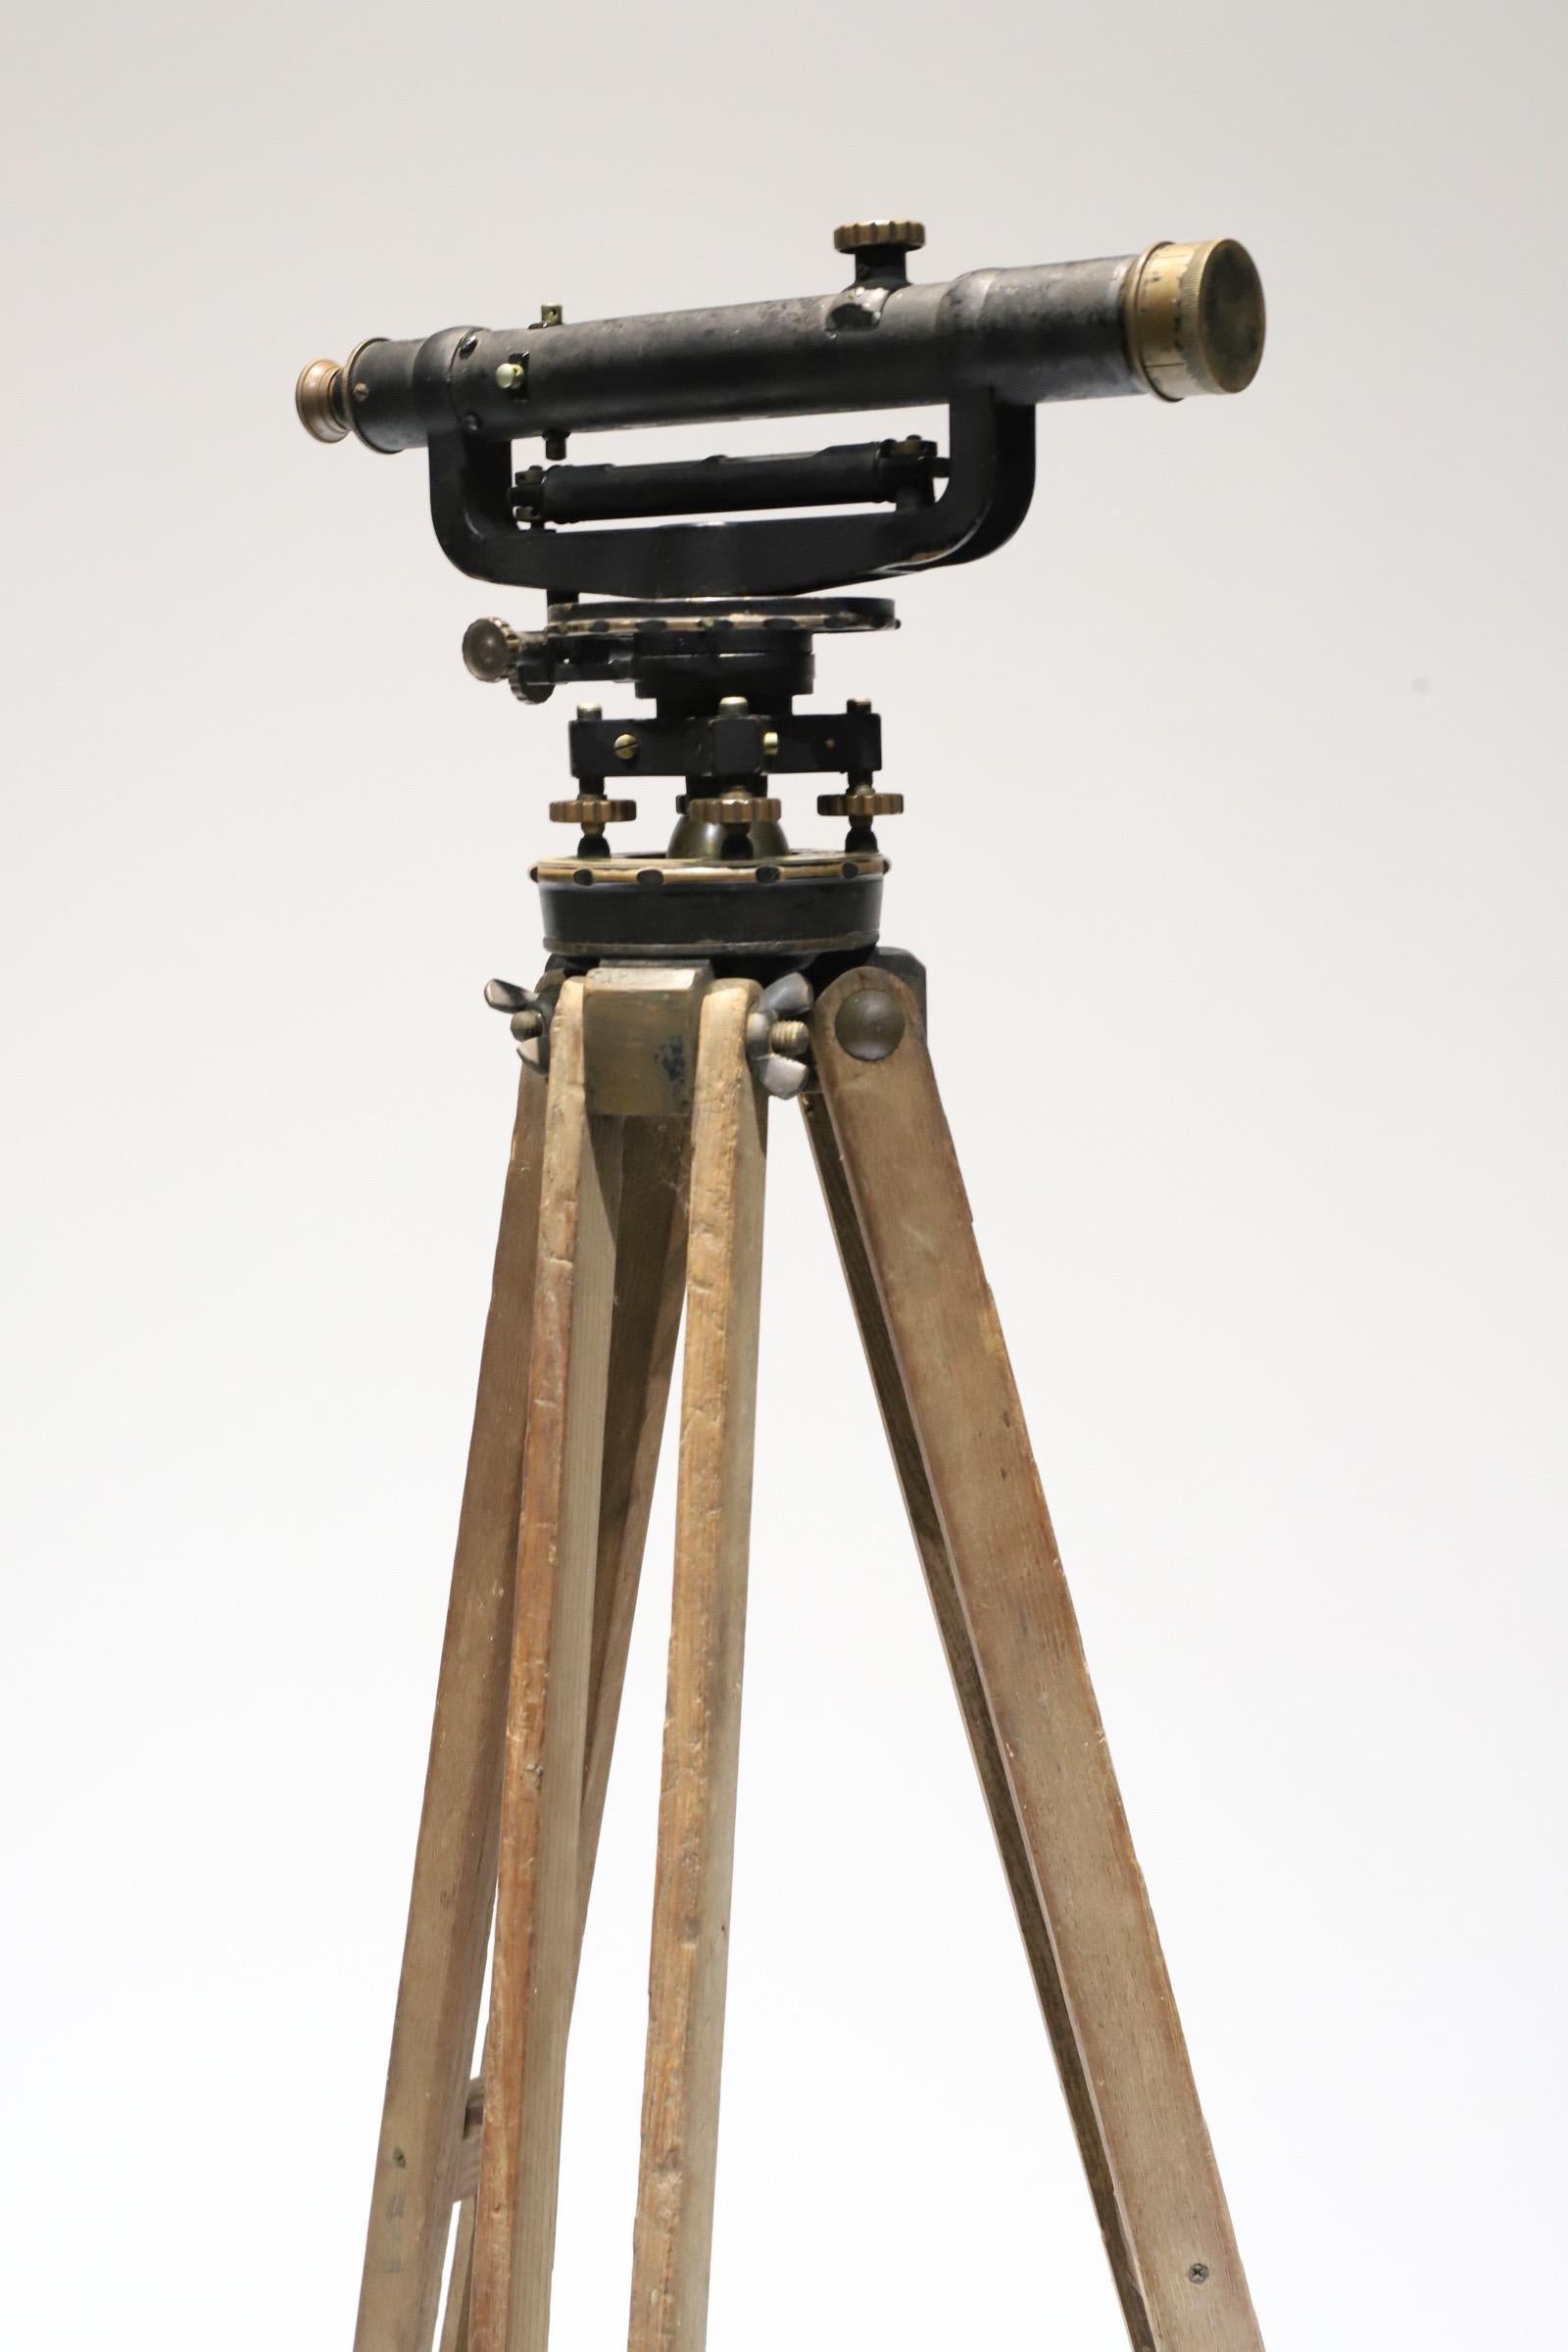 A wonderful antique piece for display. Surveyors transit by R.L. Sargent Company with tripod and original wood case. Tripod shows signs of handy repair for use over the many years. Sold as a display piece only. Measurements are at widest points when